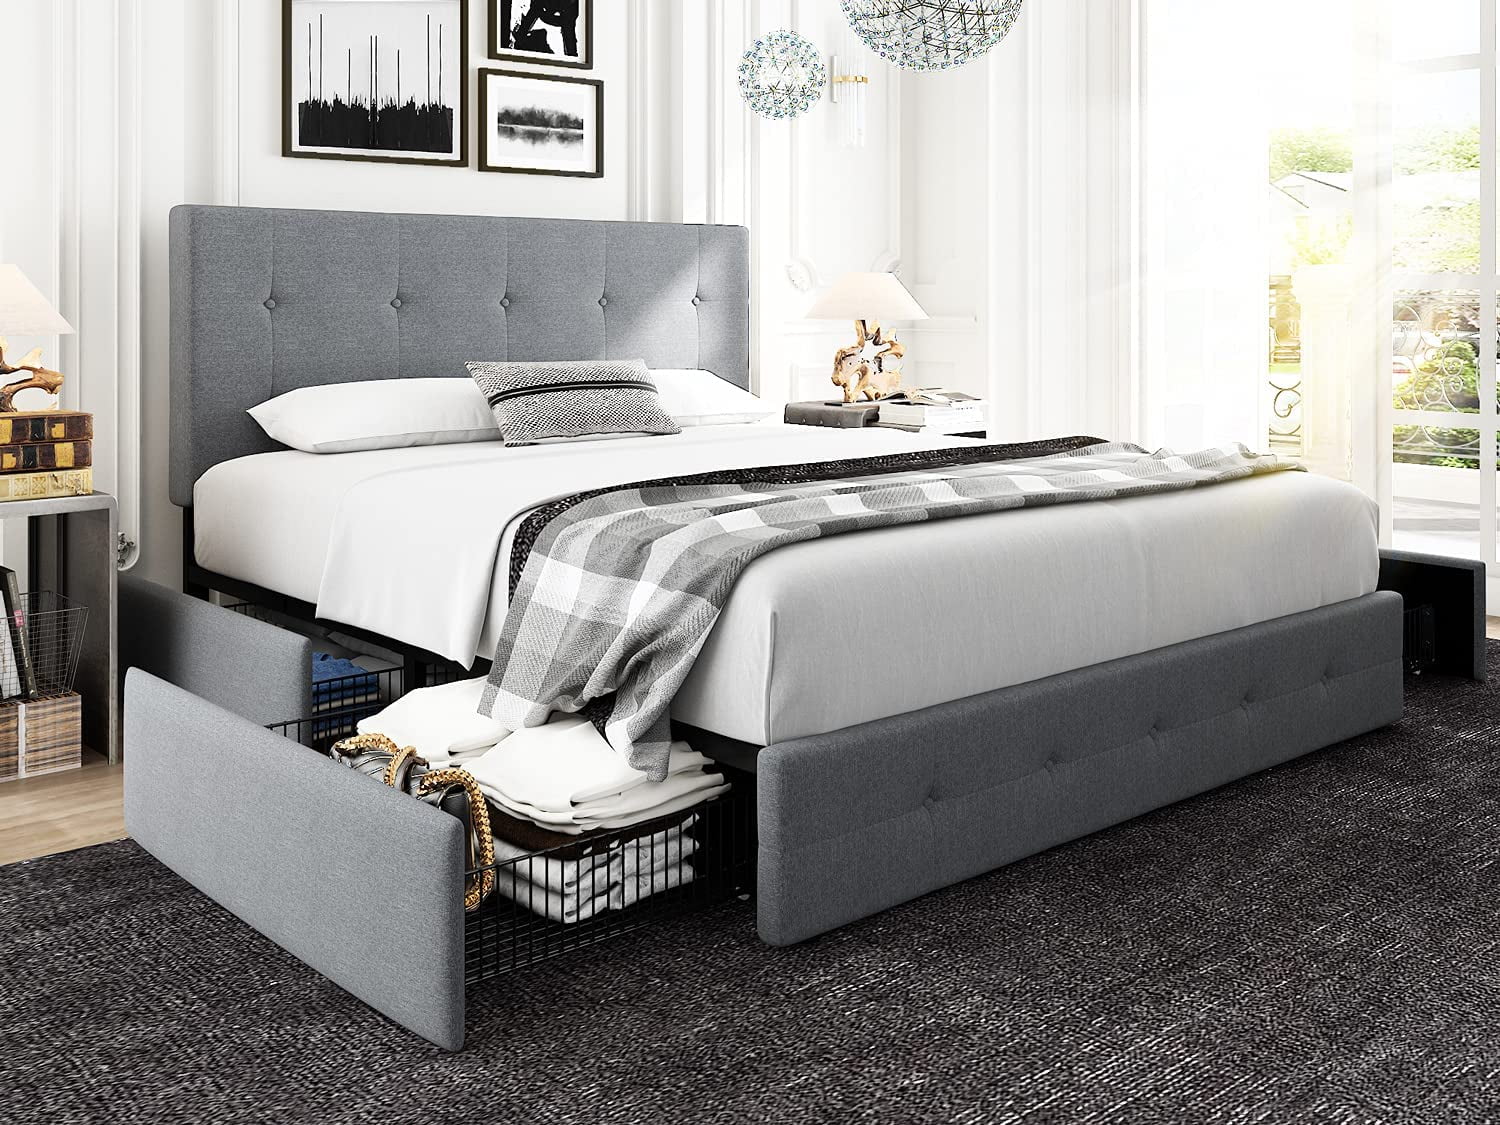 NextFur Light Grey Queen Platform Bed Frame with 4 Drawers Storage and